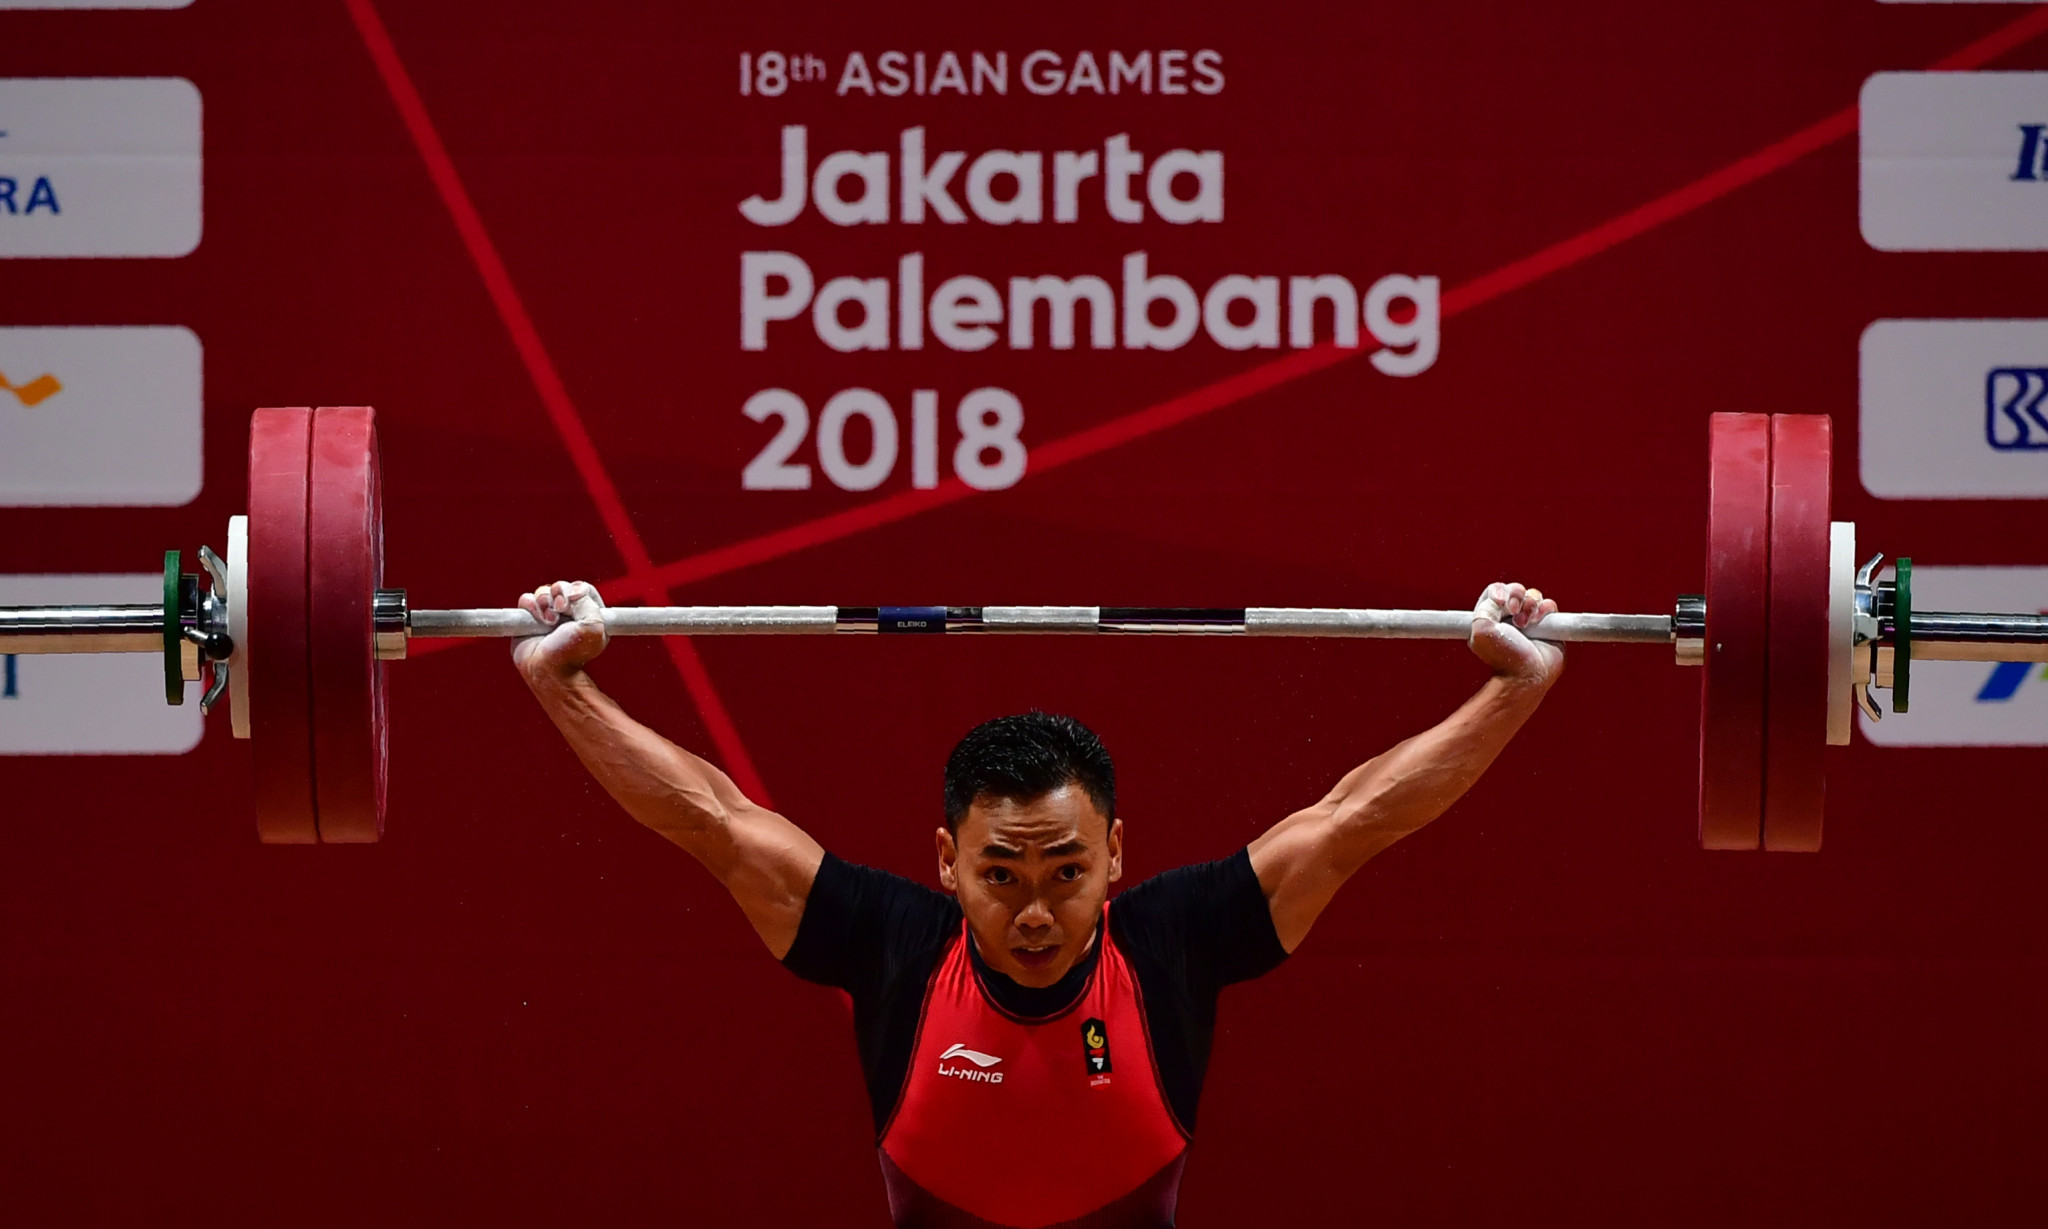 World champion Eko Yuli Irawan of Indonesia is among the star athletes set to compete in Fuzhou ©Getty Images